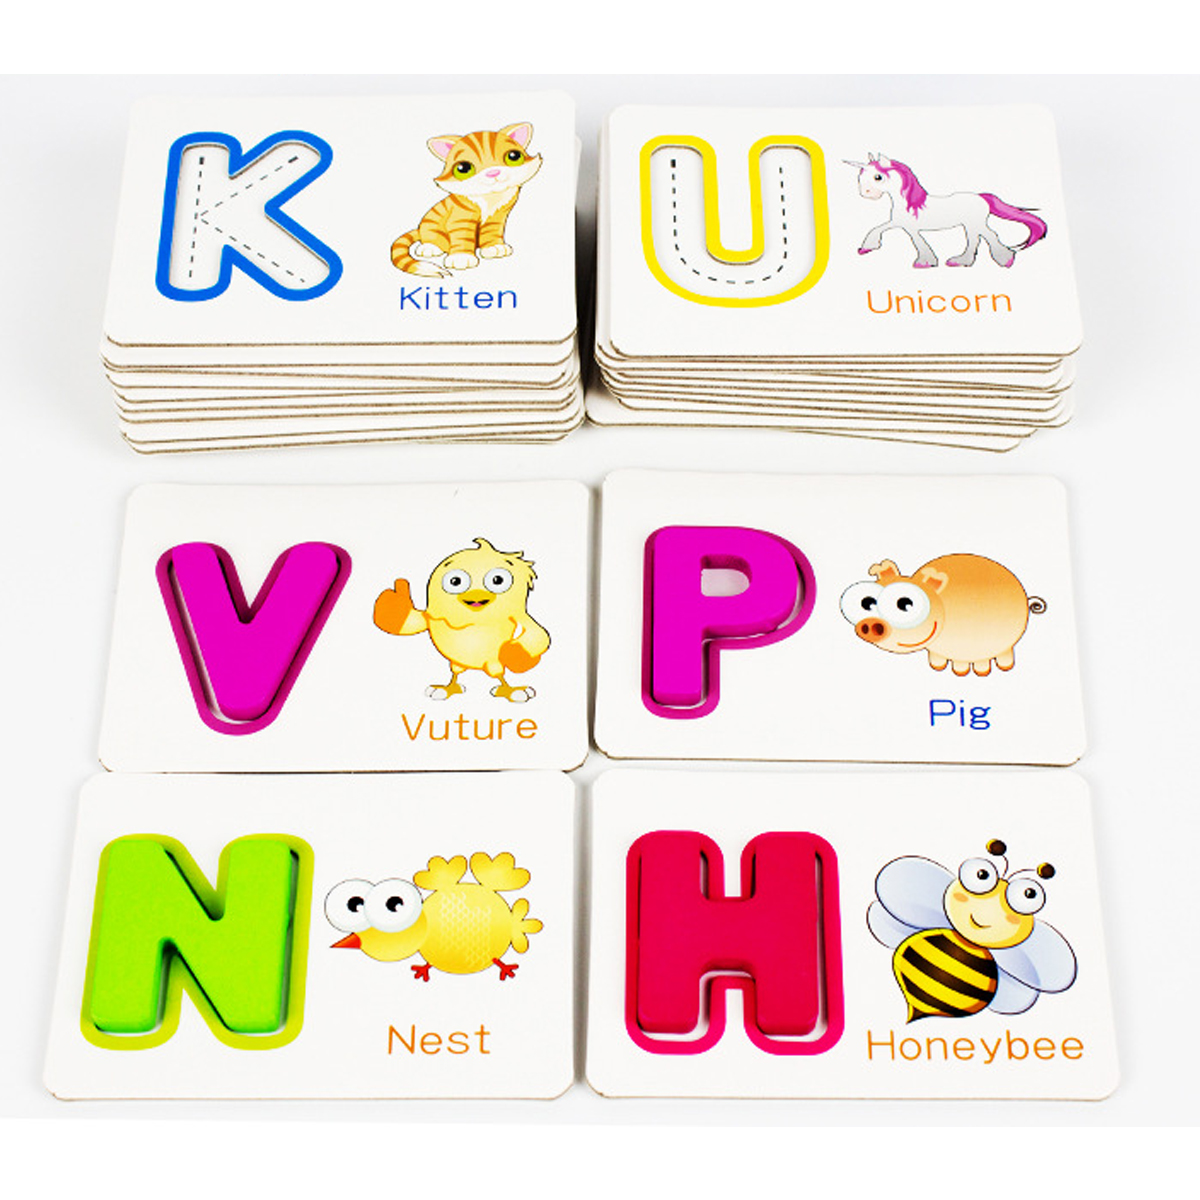 Puzzle-Alphabet-Spelling-English-Letters-Animal-Cards-Educational-Learning-Toy-for-Kids-Gift-1726968-10